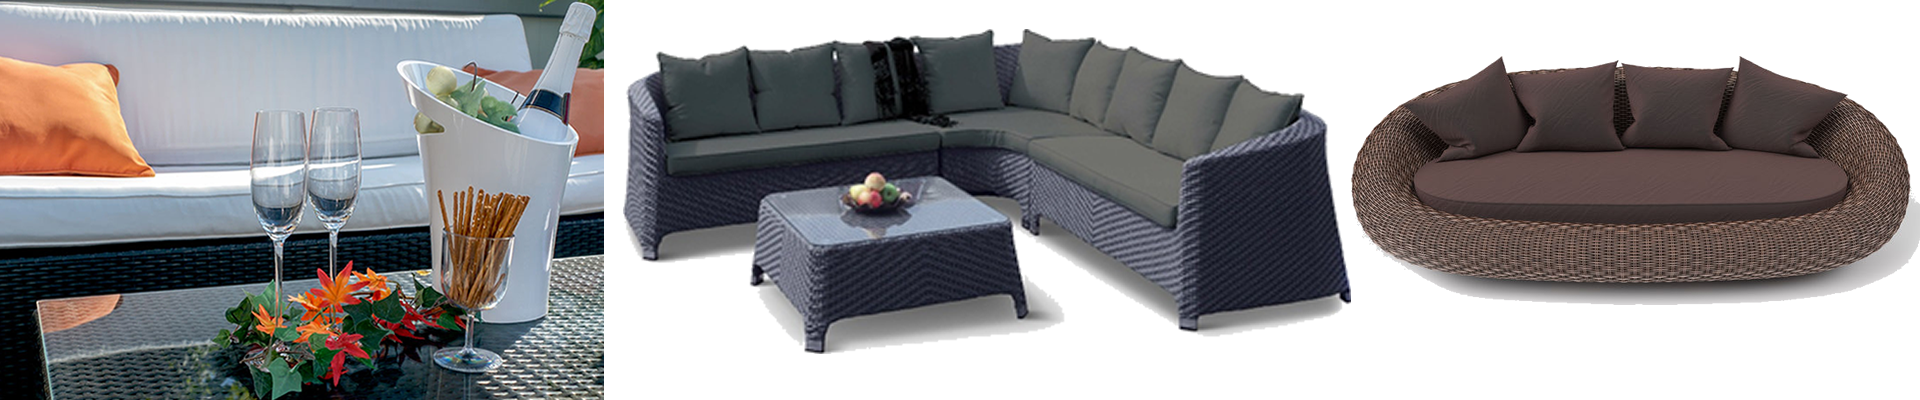 Conservatory Sofas | Sofas for the Conservatory